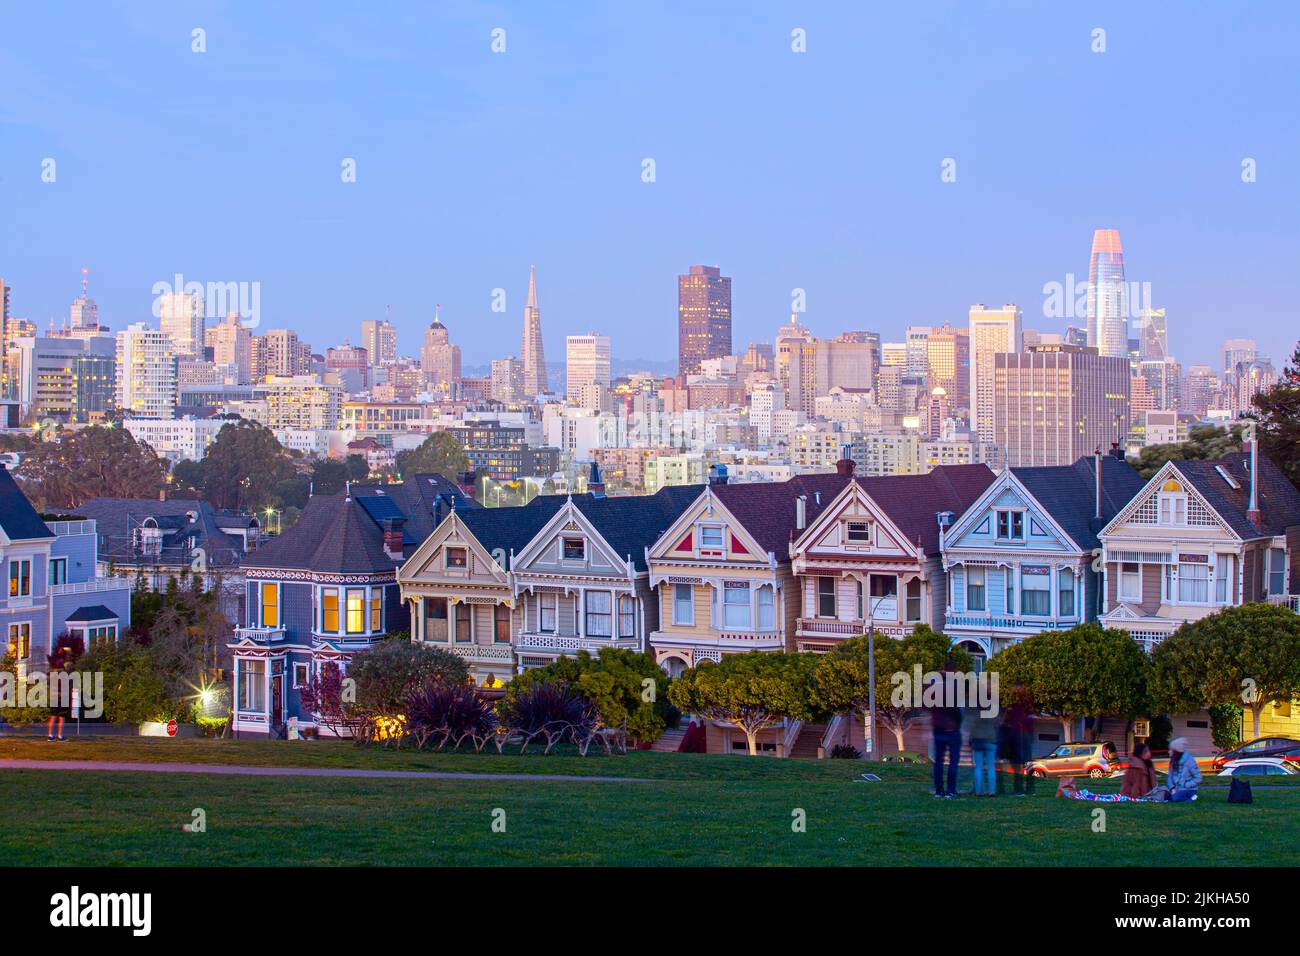 A scenic view of The Painted Ladies during sunset in San Francisco, California Stock Photo